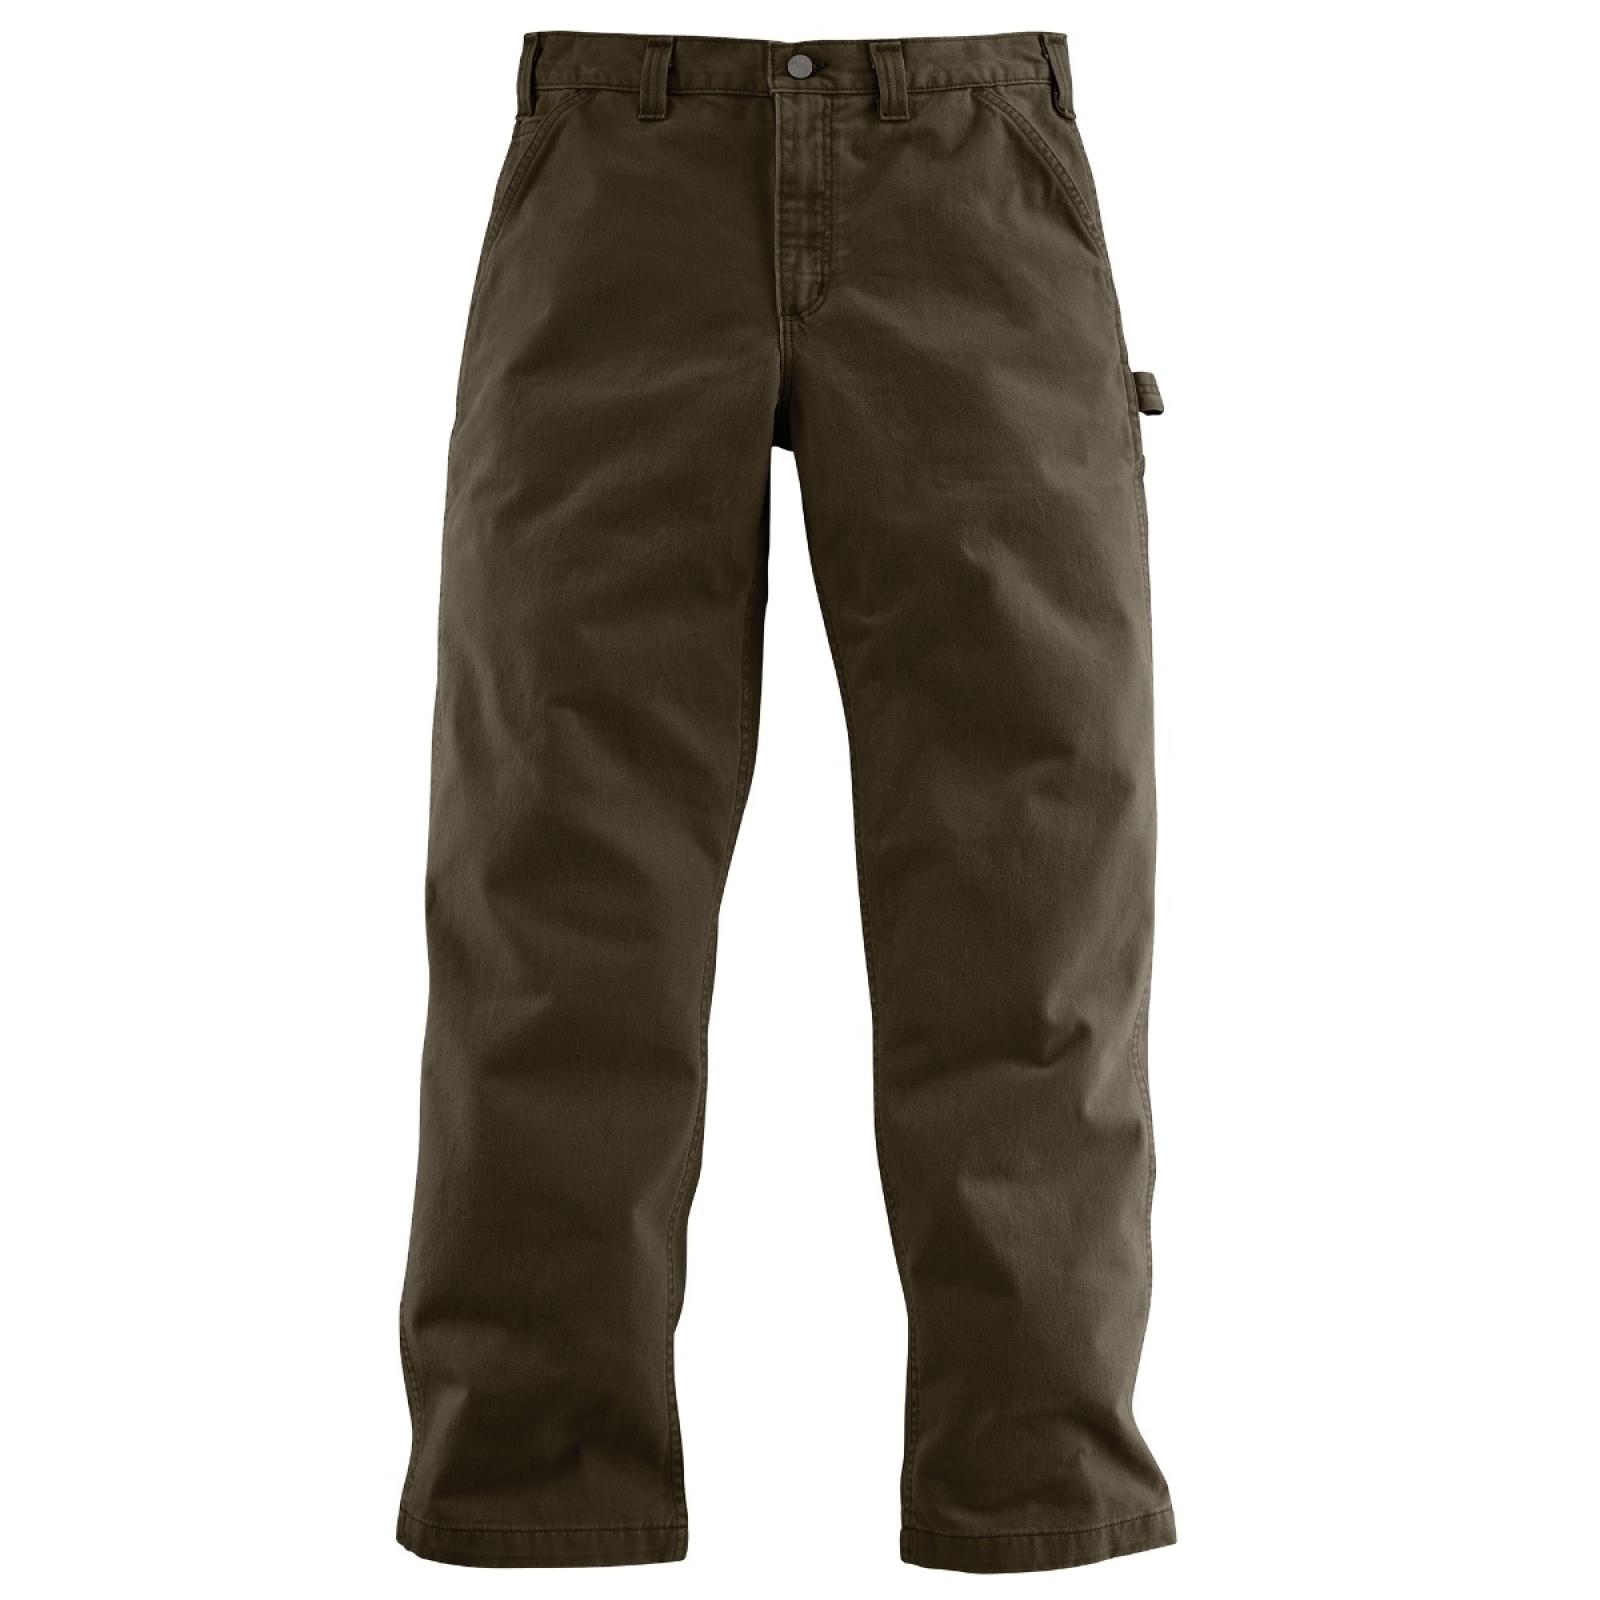 Carhartt Mens Washed Twill Relaxed Fit Work Pant